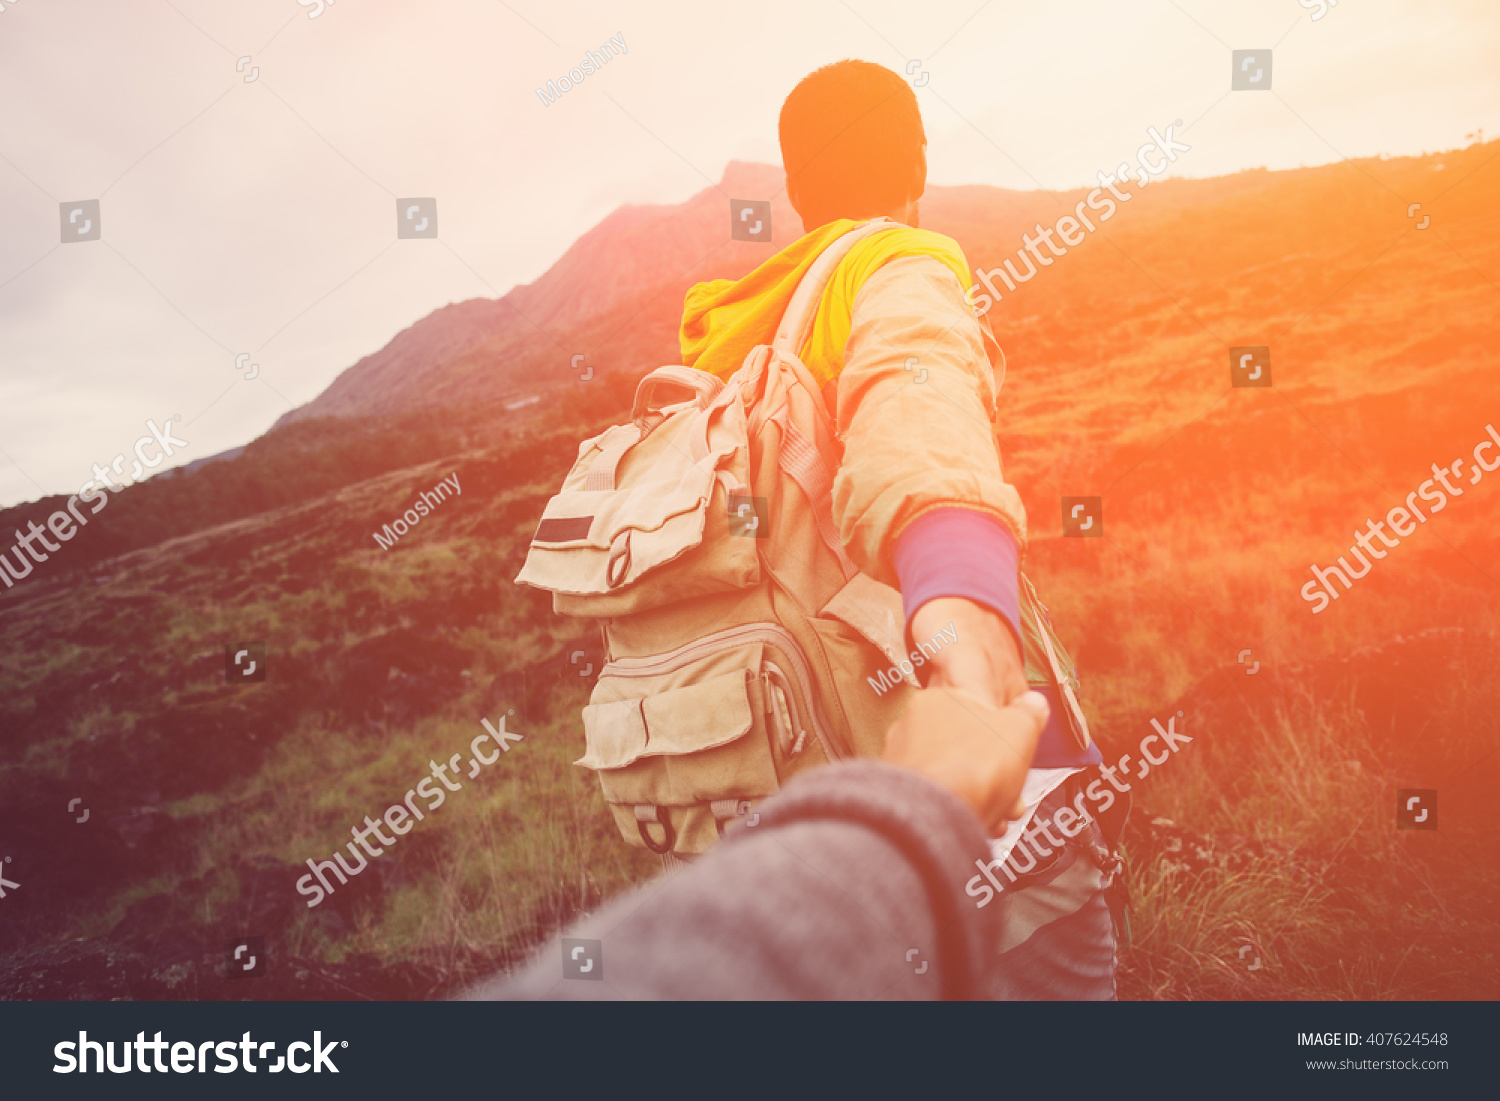 Brave and romantic traveler guiding woman to the mountain in the wild (intentional sun glare and vintage color) #407624548